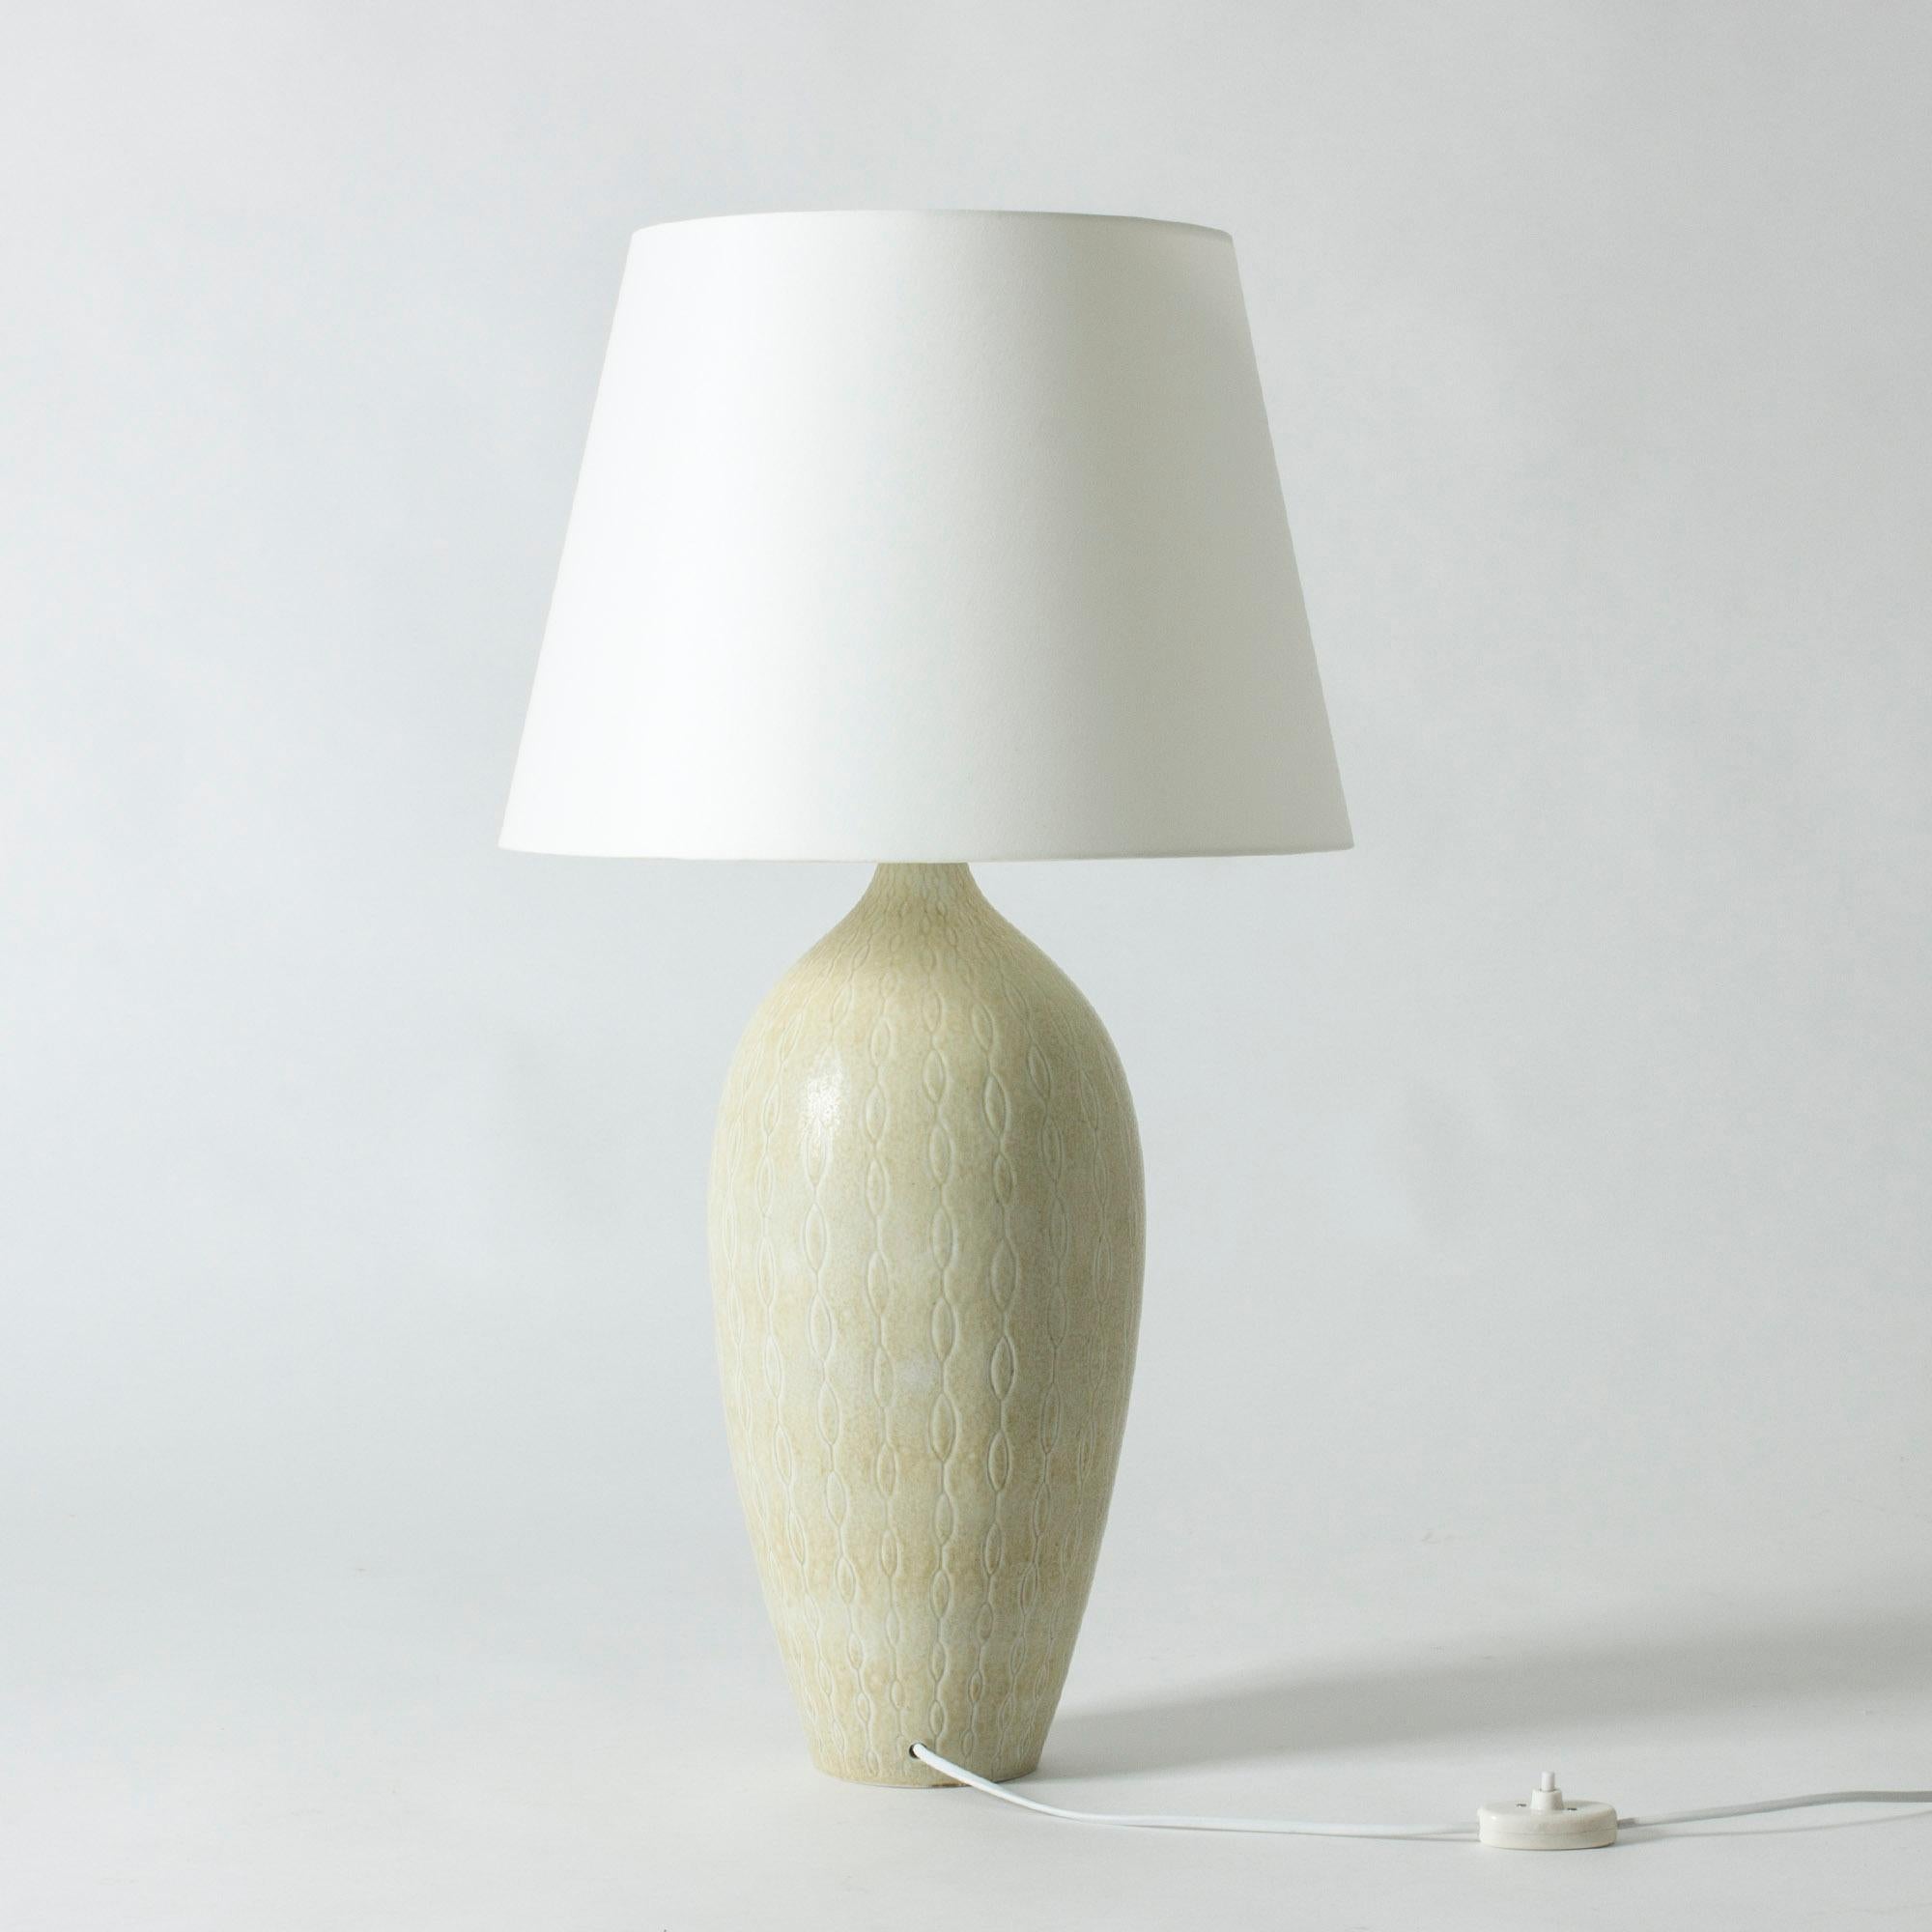 Striking, large table lamp by Carl-Harry Stålhane. Stoneware base with a beautiful wavy pattern, glazed eggshell white.